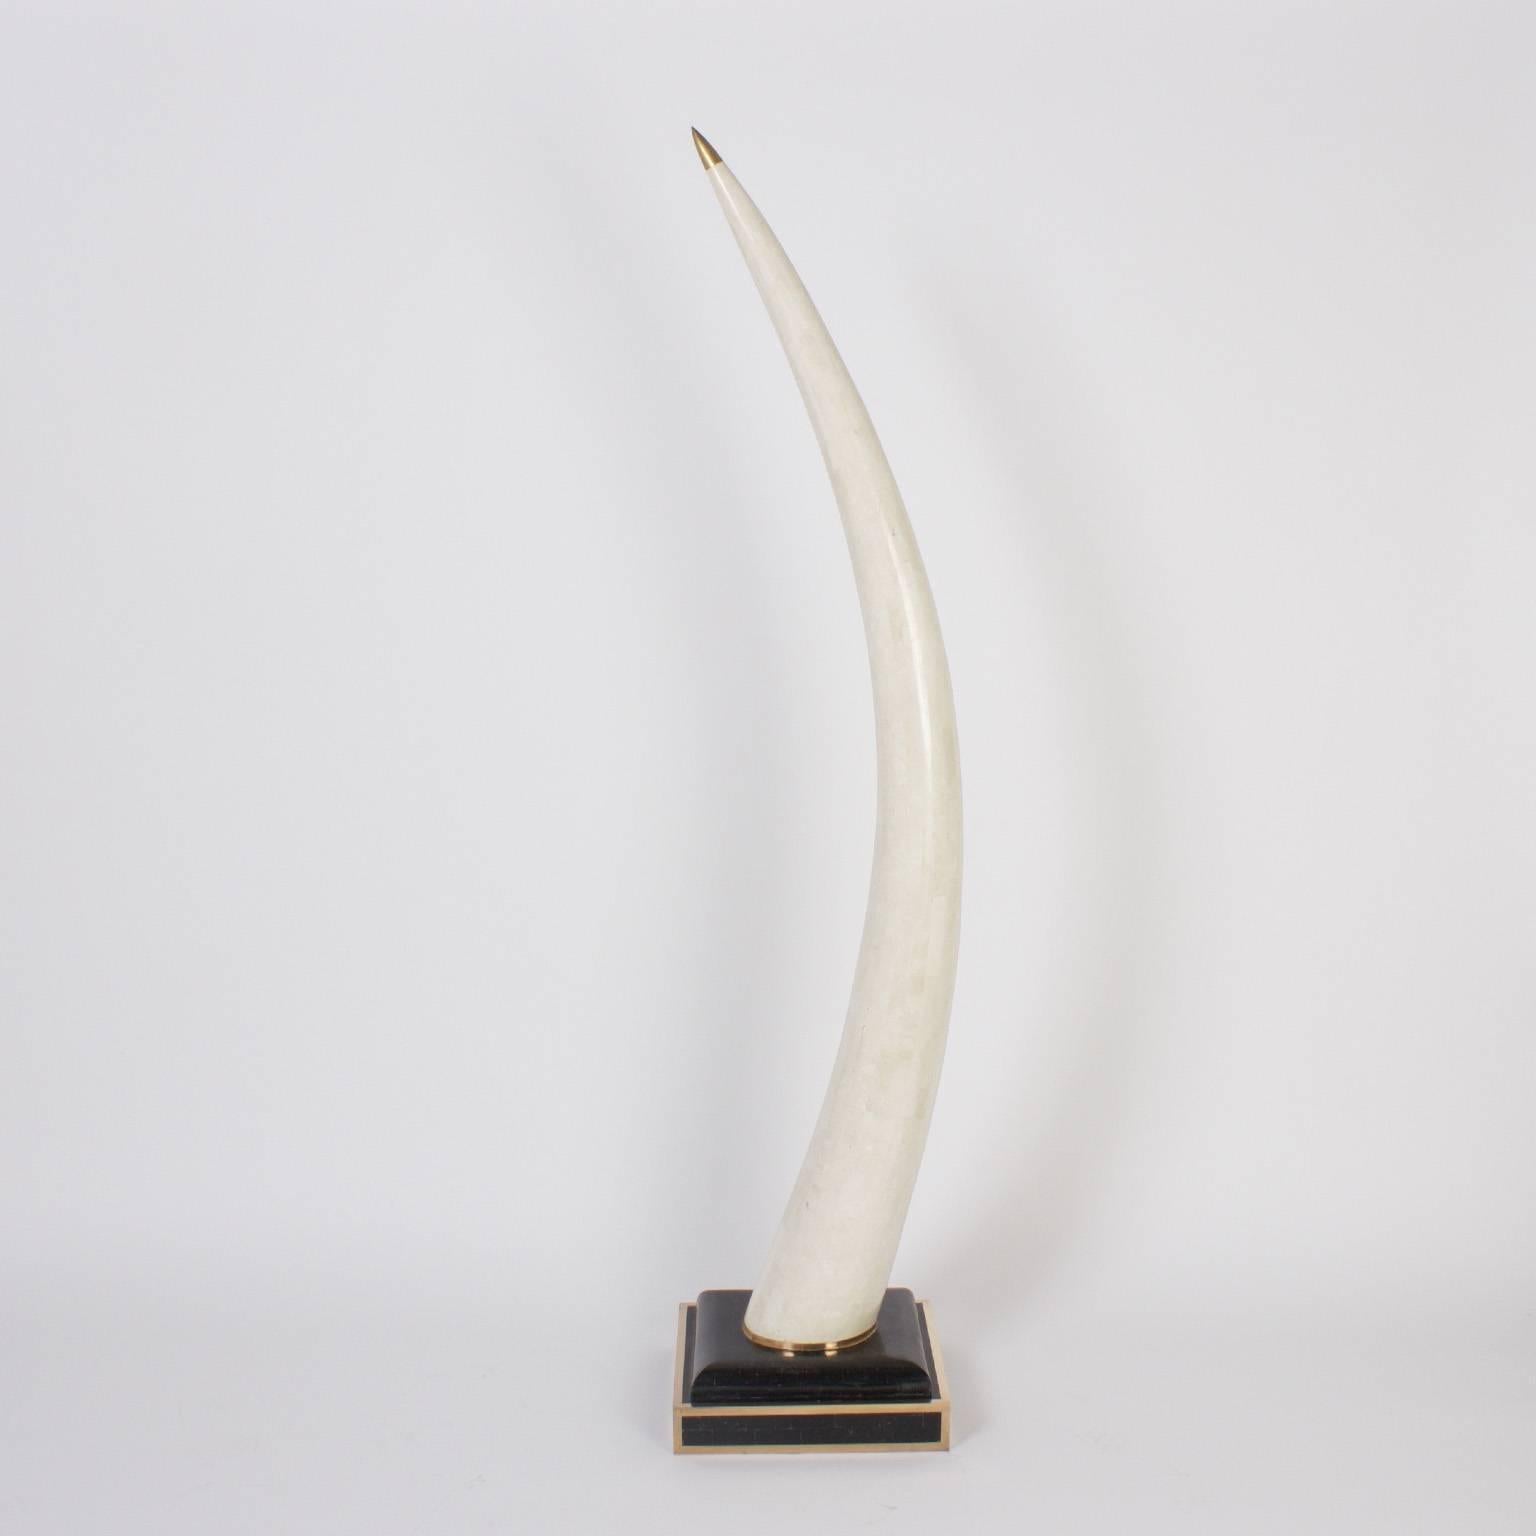 Chic, mid century pair of faux elephant tusks crafted with stone and capped with brass points, presented on tessellated black stone bases bordered with brass. Will add a dramatic element to any interior.
